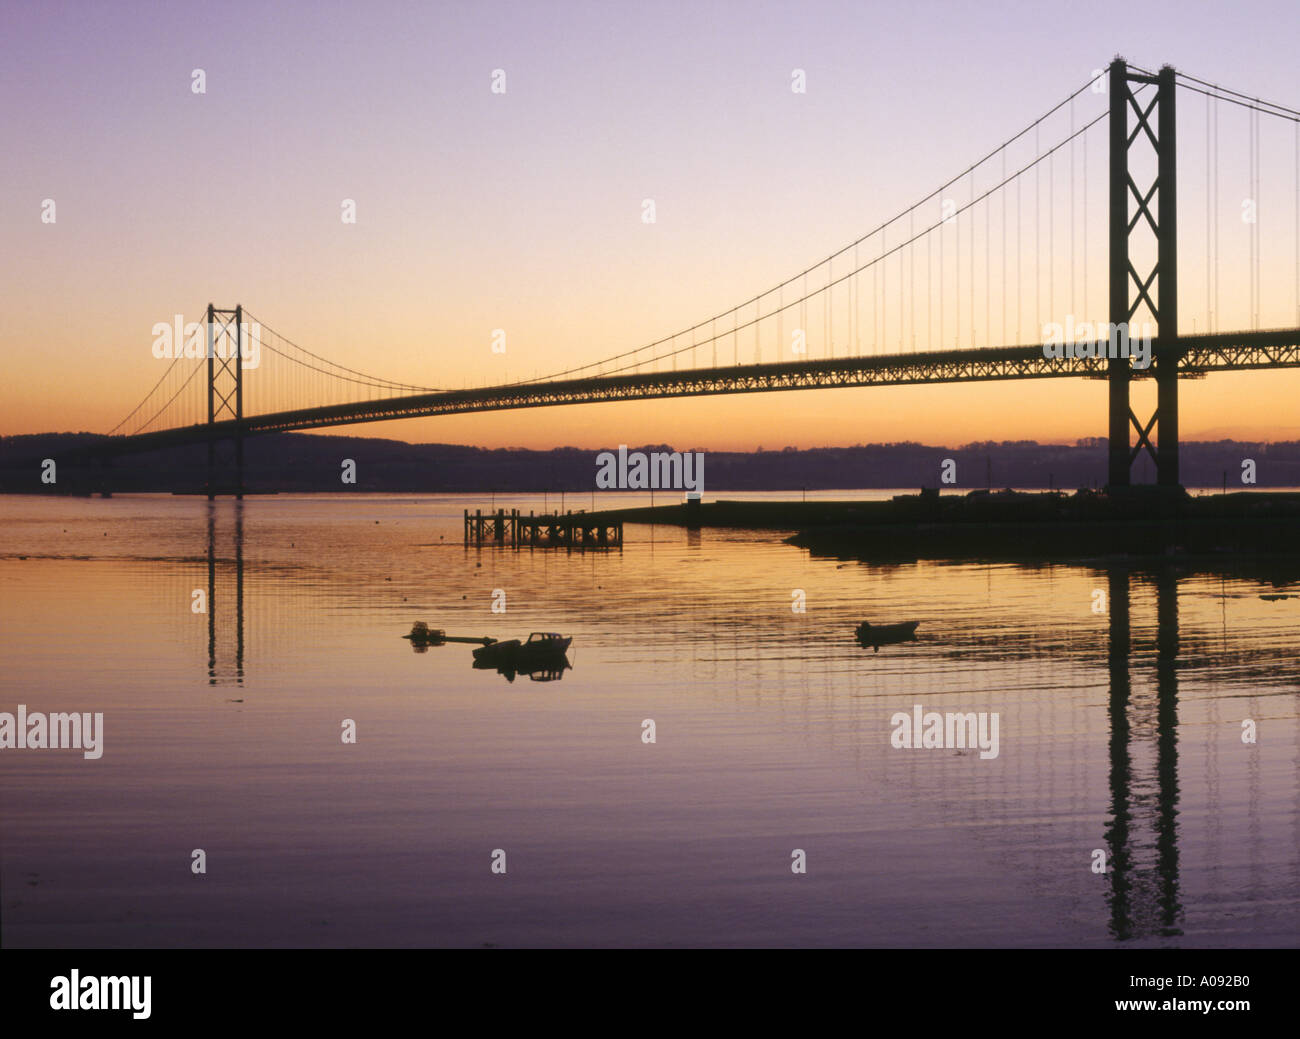 dh Forth Road Bridge NORTH QUEENSFERRY FIFE Scottish Cable suspension bridge across river forth at sunset scotland dusk Stock Photo